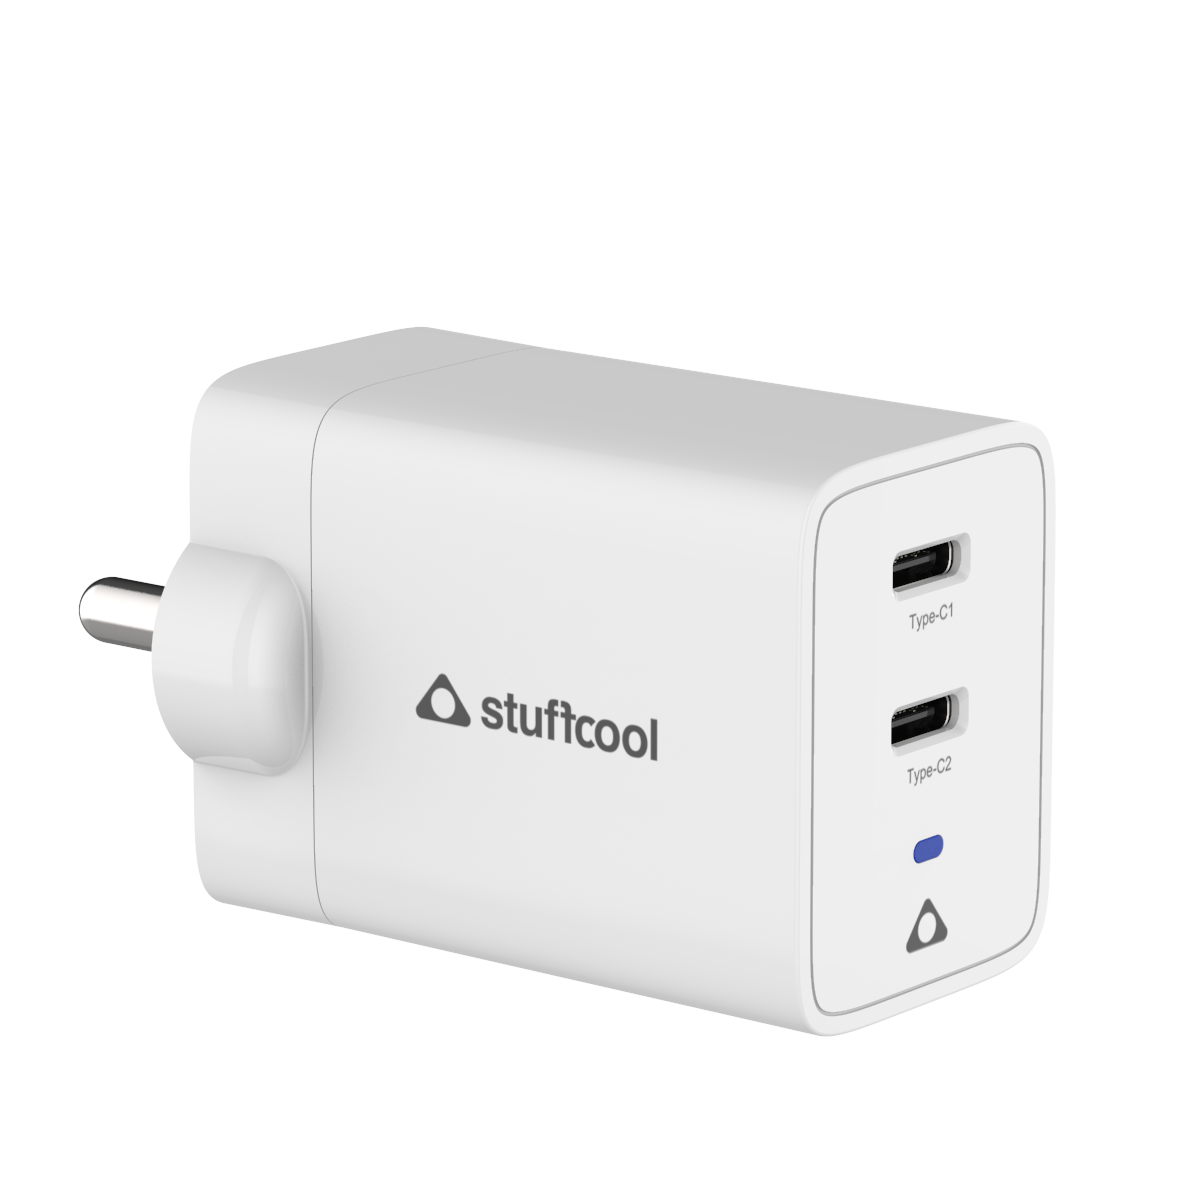 Stuffcool Neo 67 charger image